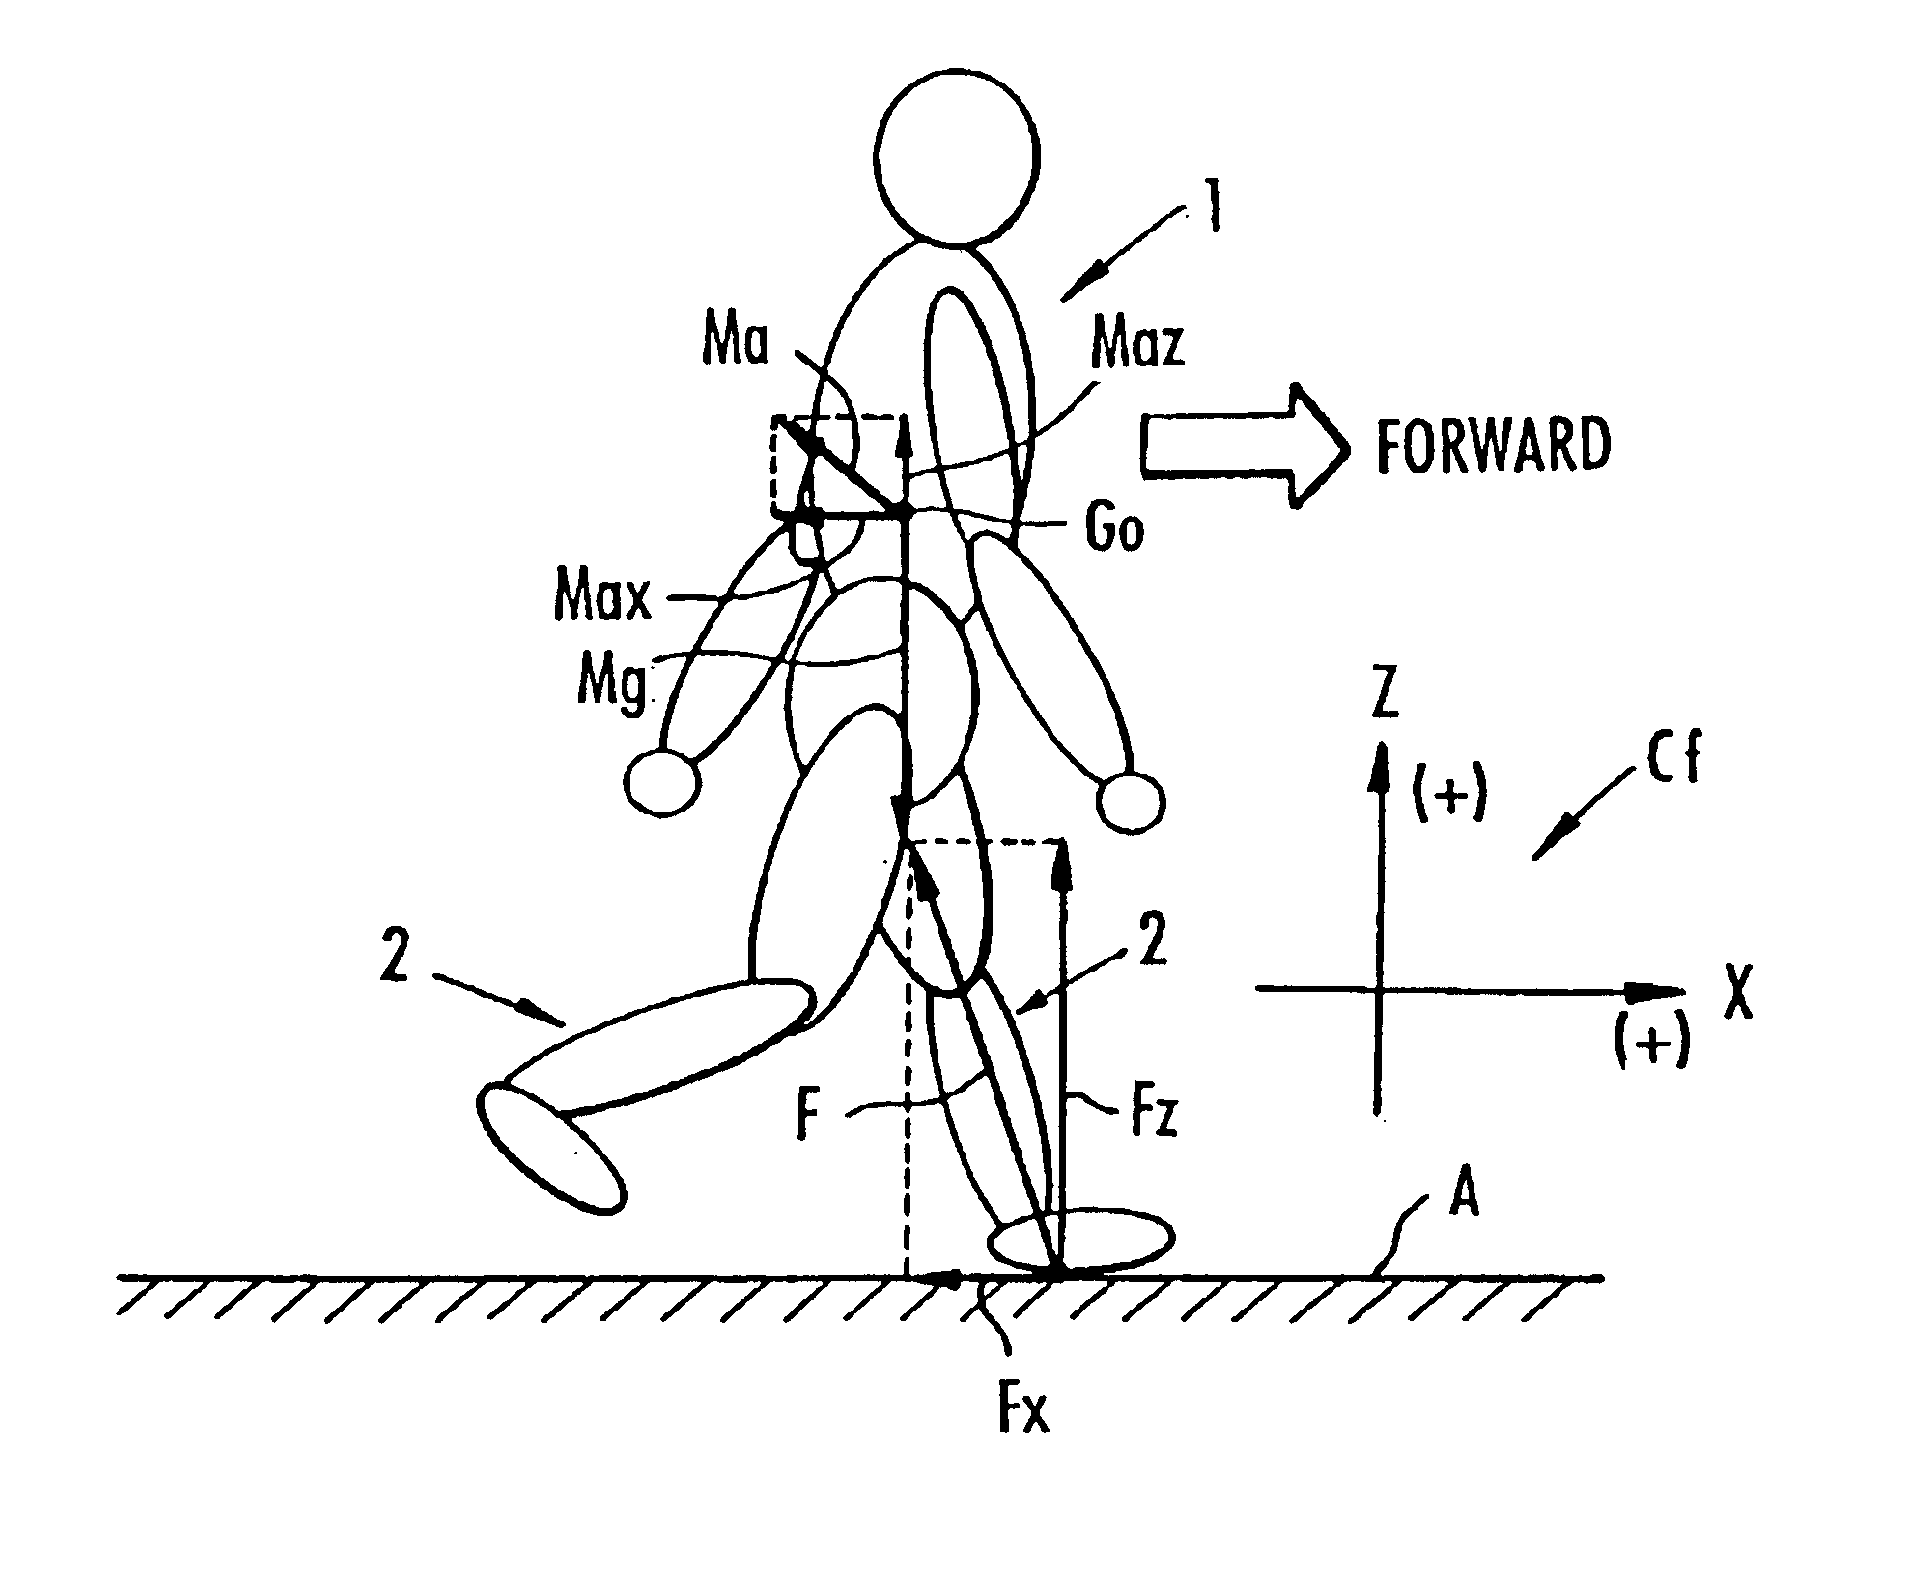 Method of estimating floor reactions of bipedal walking body, and method of estimating joint moments of bipedal walking body